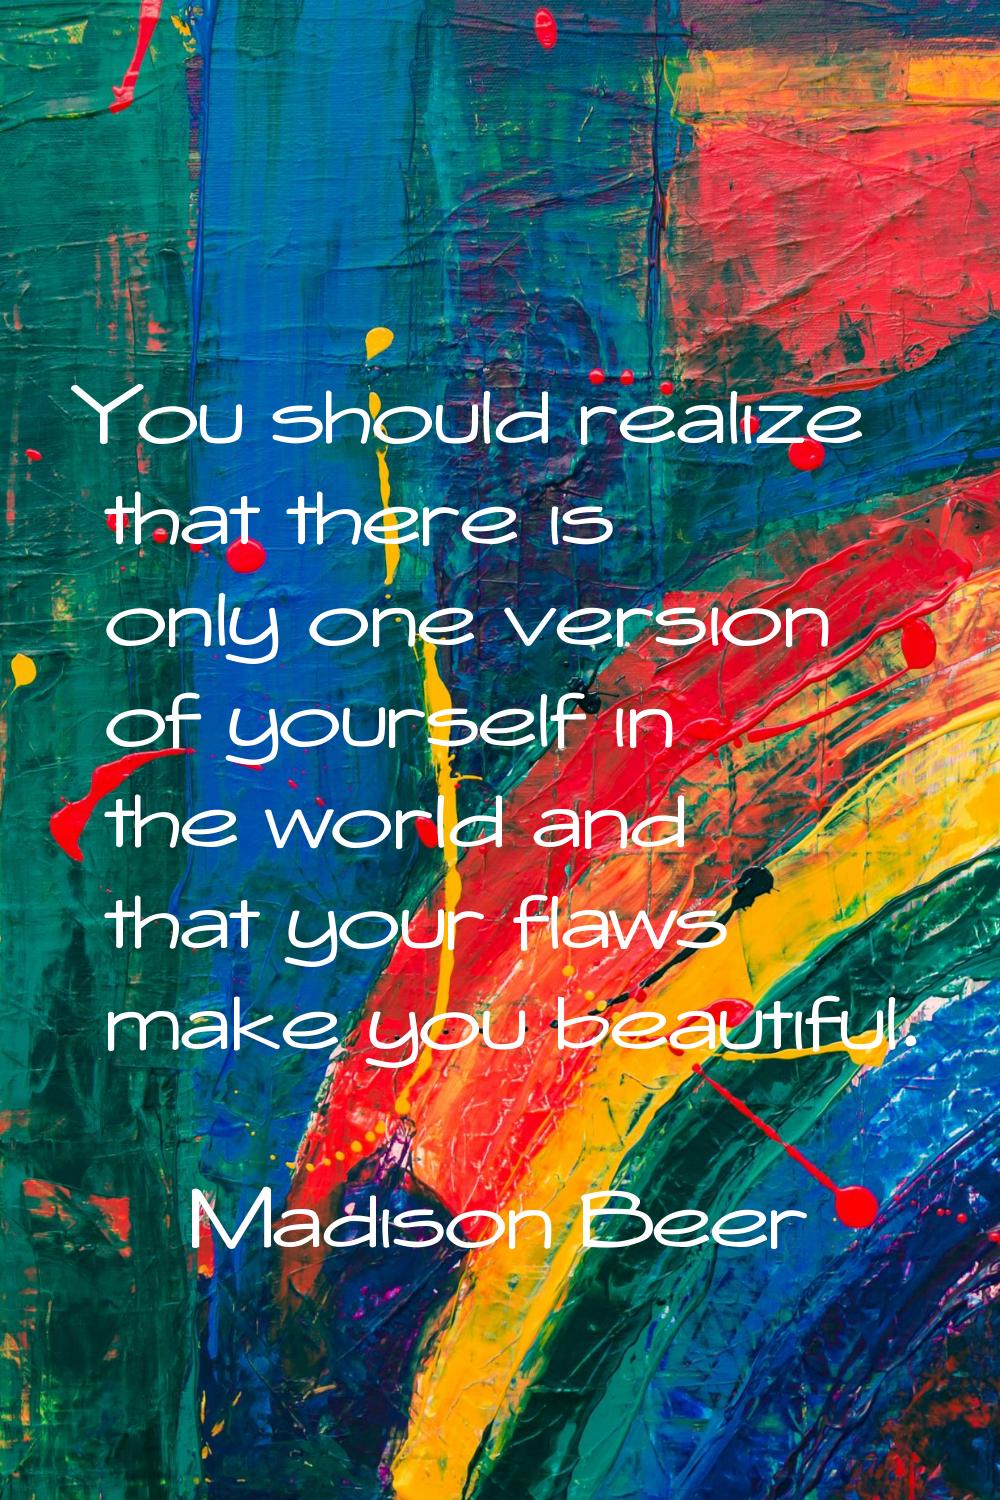 You should realize that there is only one version of yourself in the world and that your flaws make